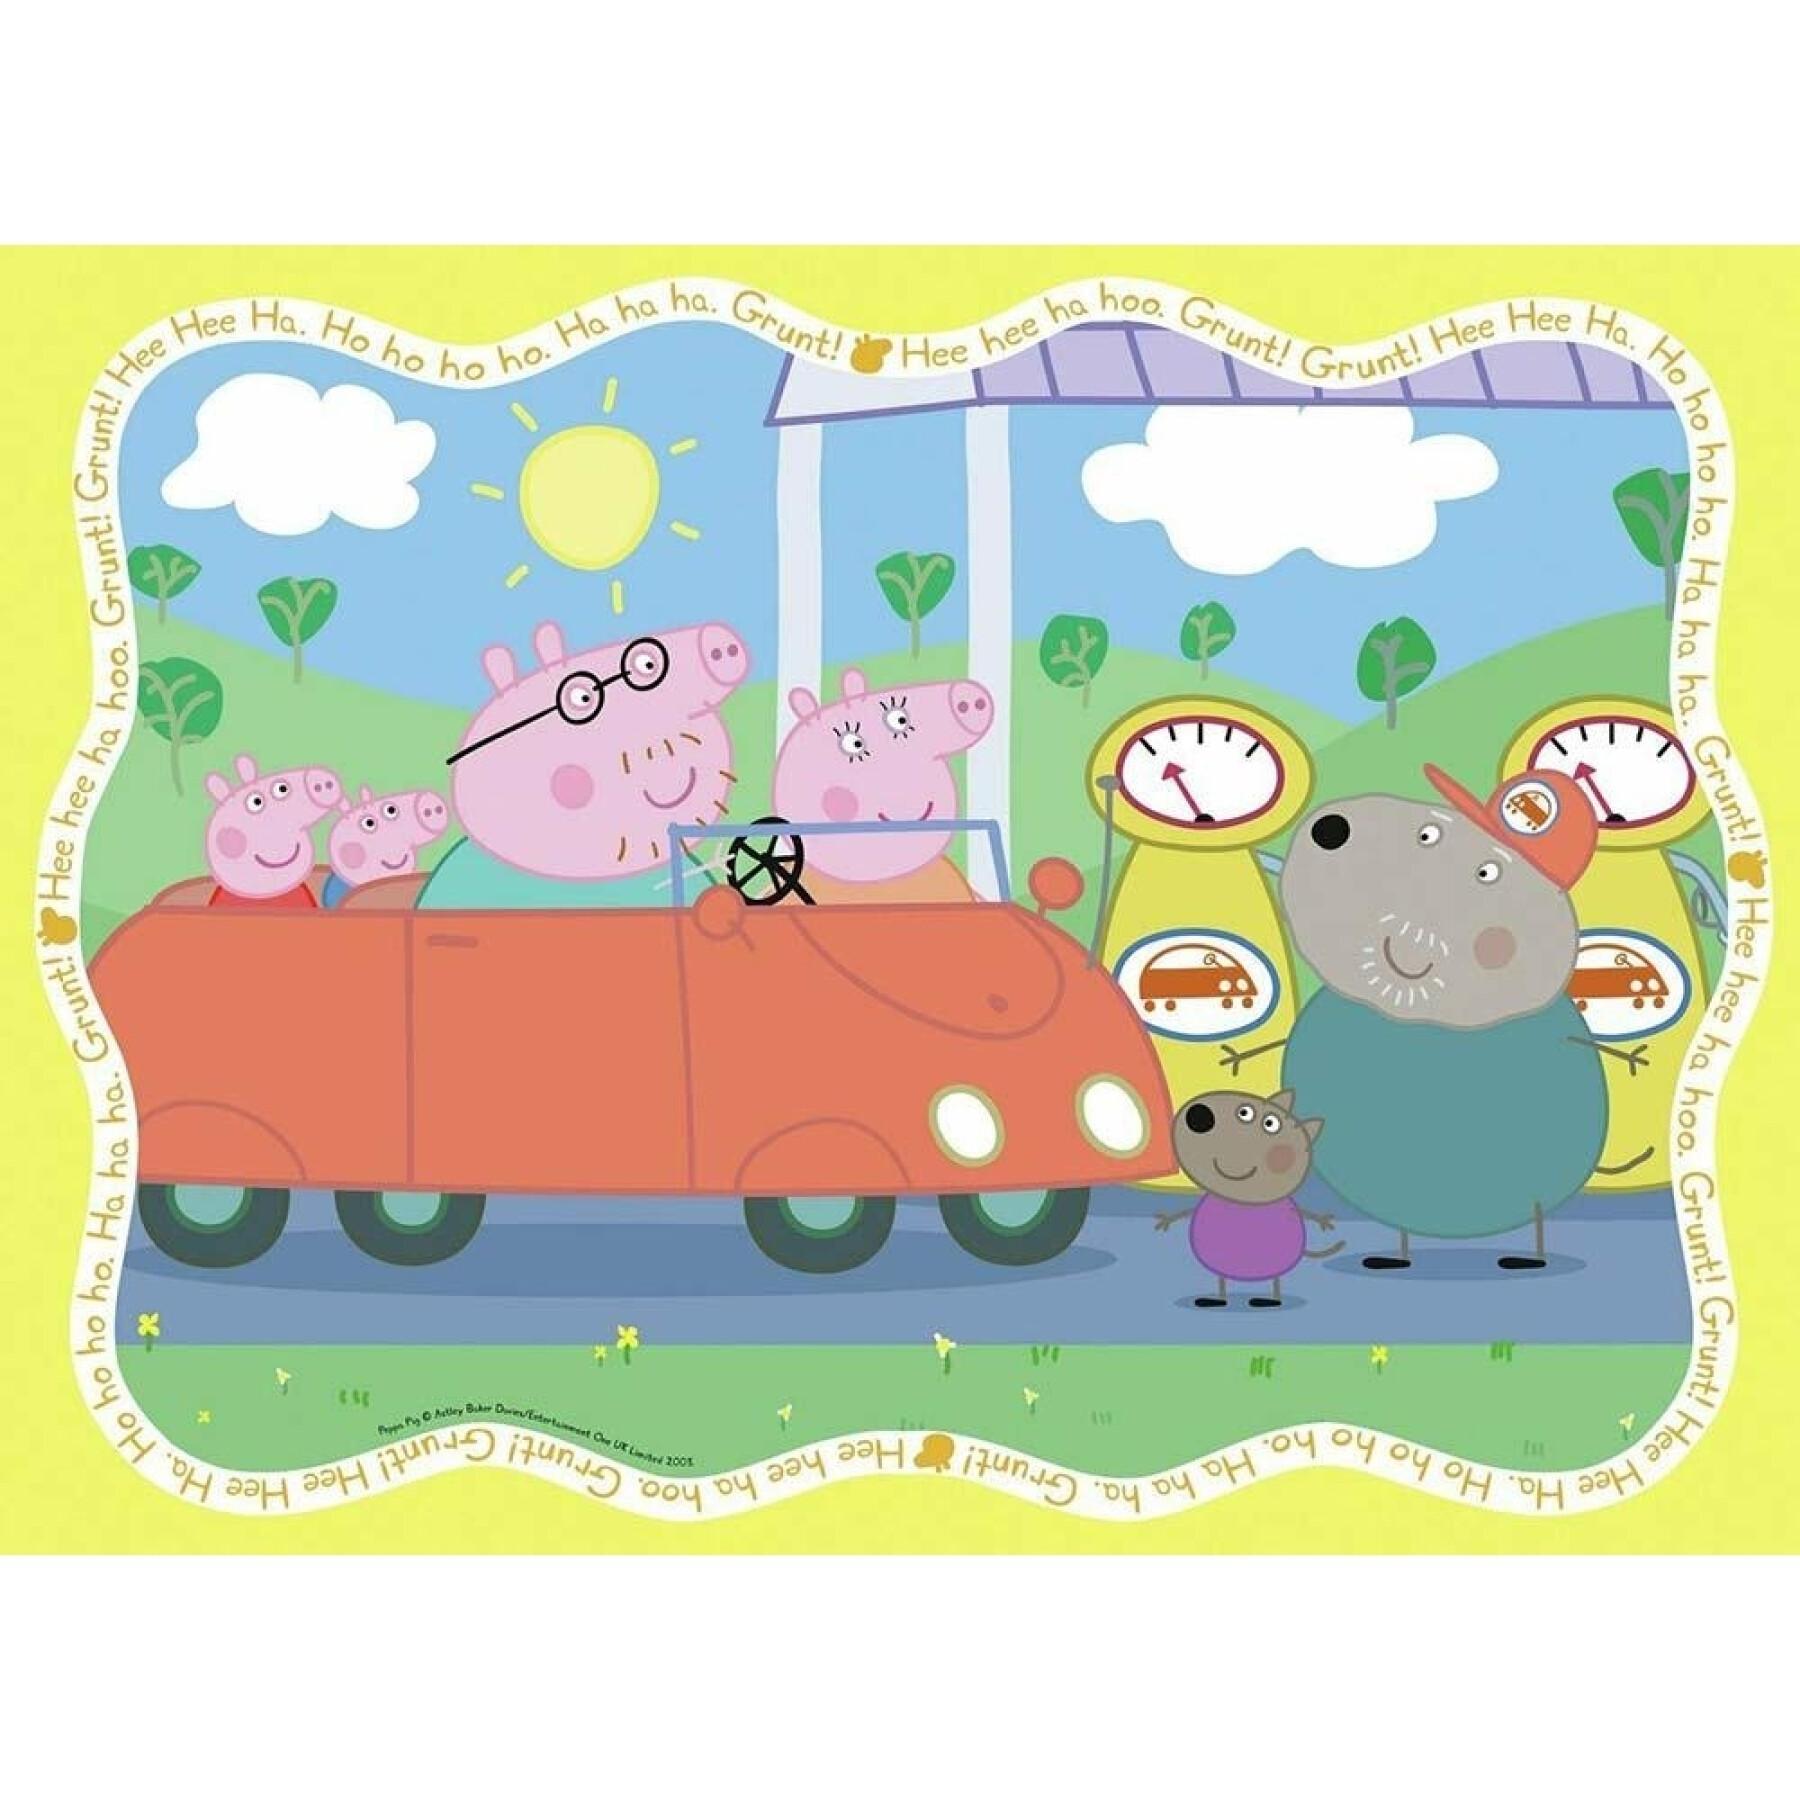 Puzzle of 4 x 42 pieces multi Peppa Pig